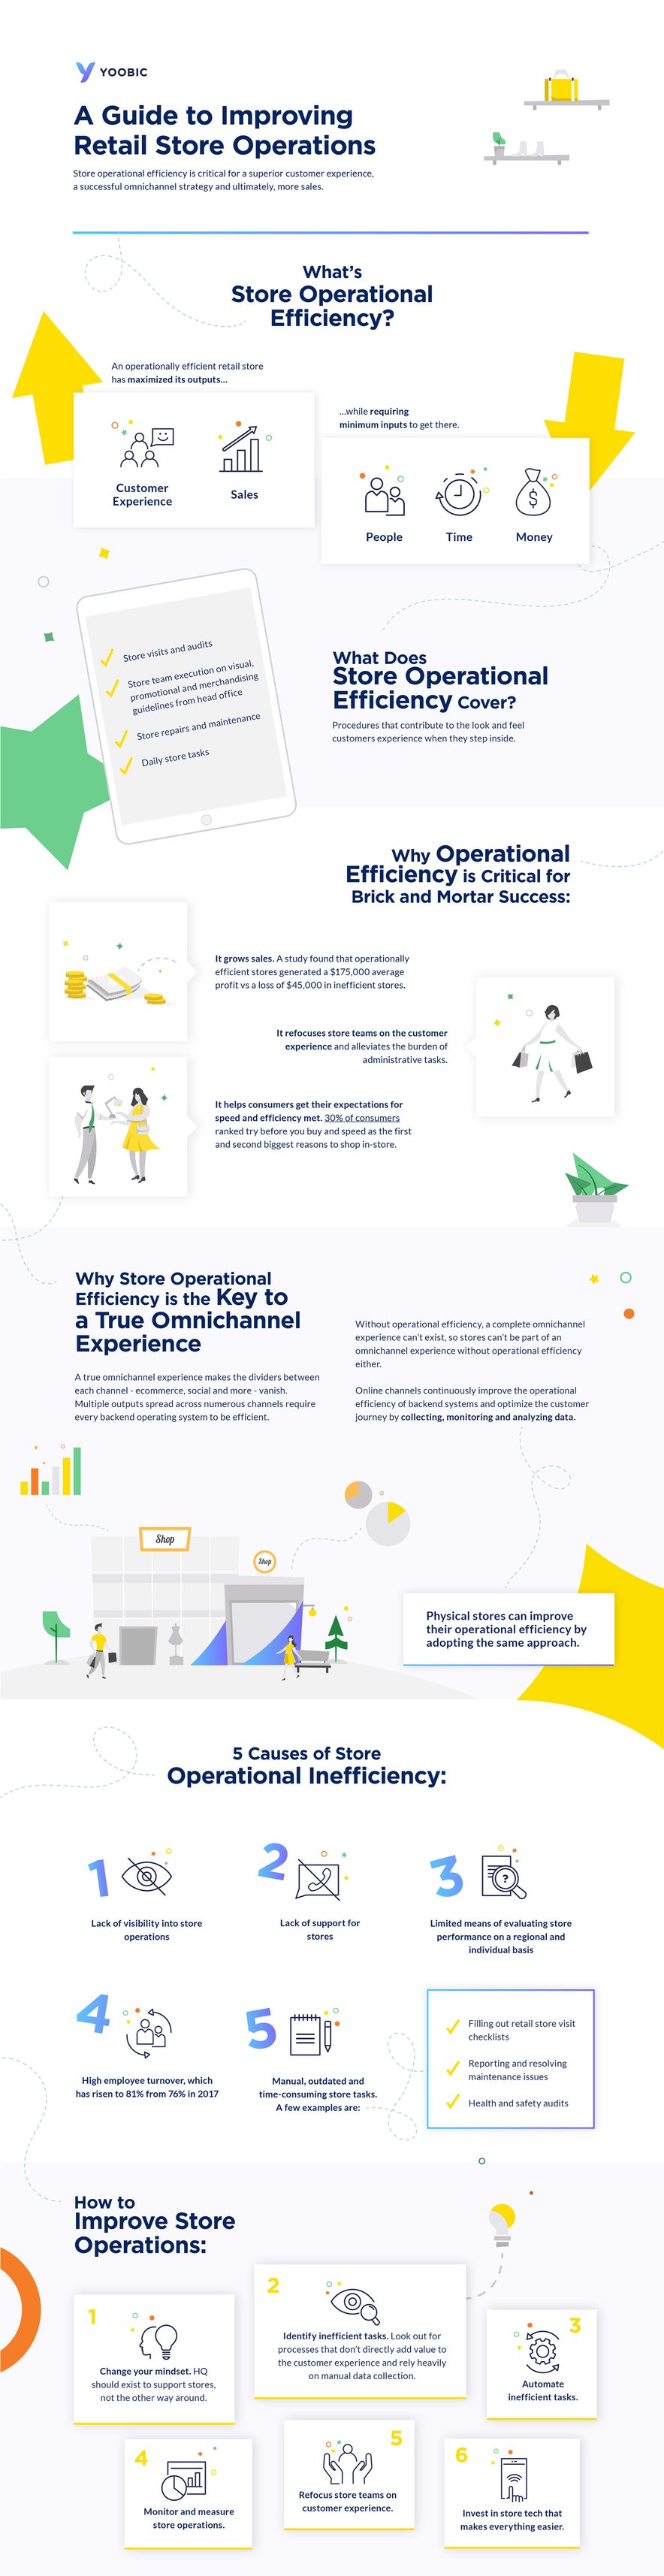 Infographic-A Guide to Improving Retail Store Operations-yoobic